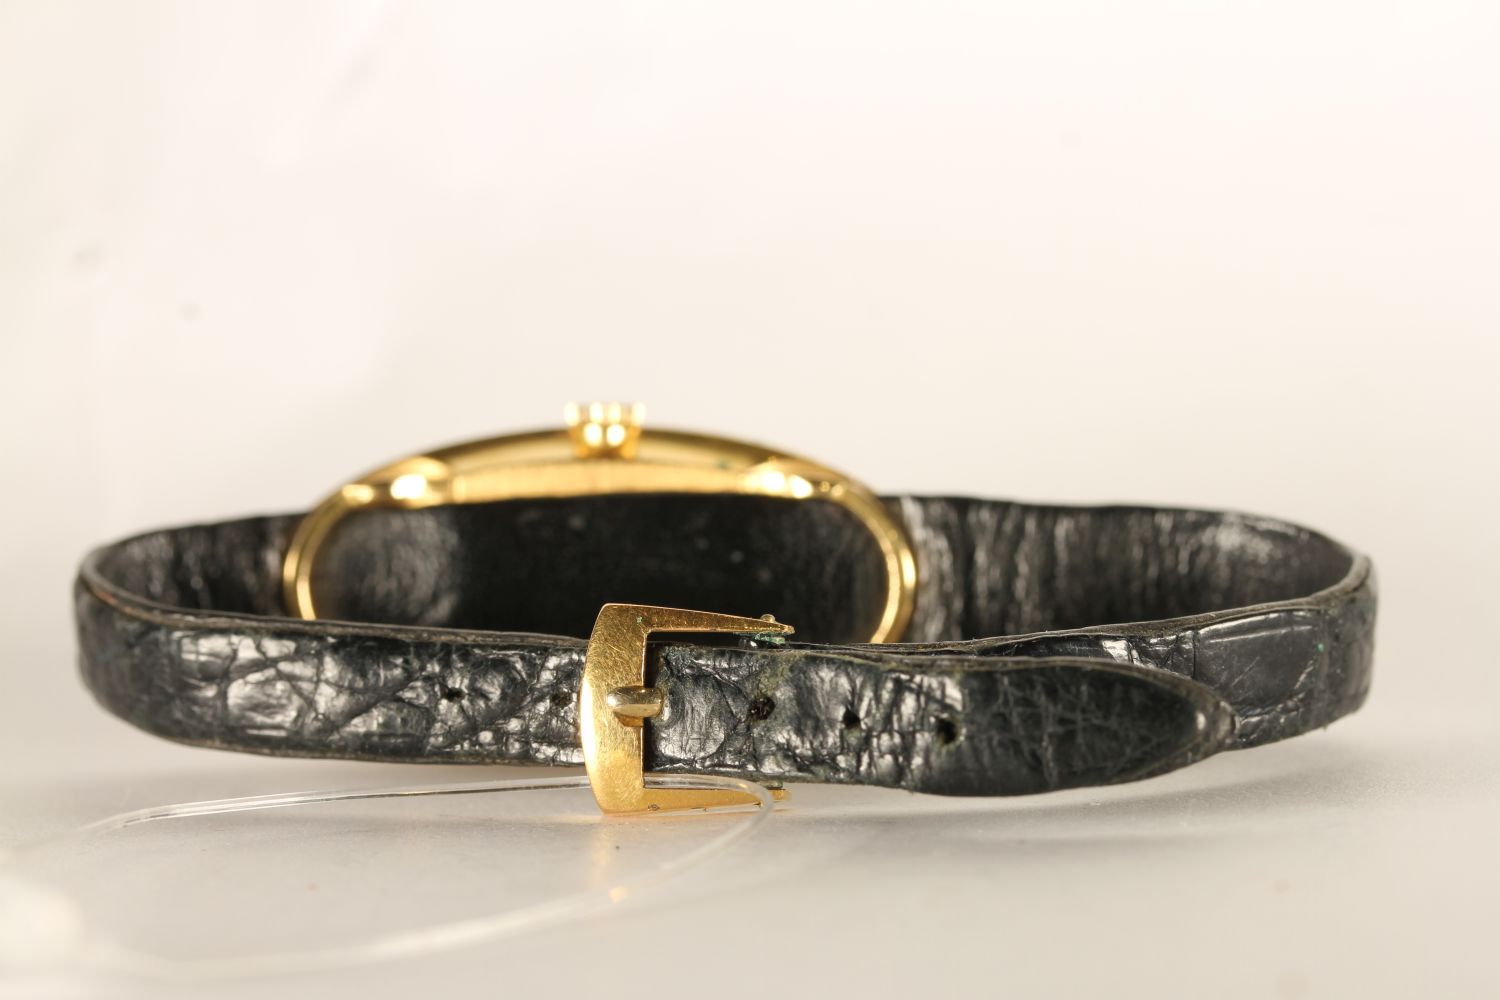 RARE LADIES BAUME & MERCIER BAIGNOIRE WRISTWATCH REF. 38261, oval black dial with gold leaf hands, - Image 2 of 2